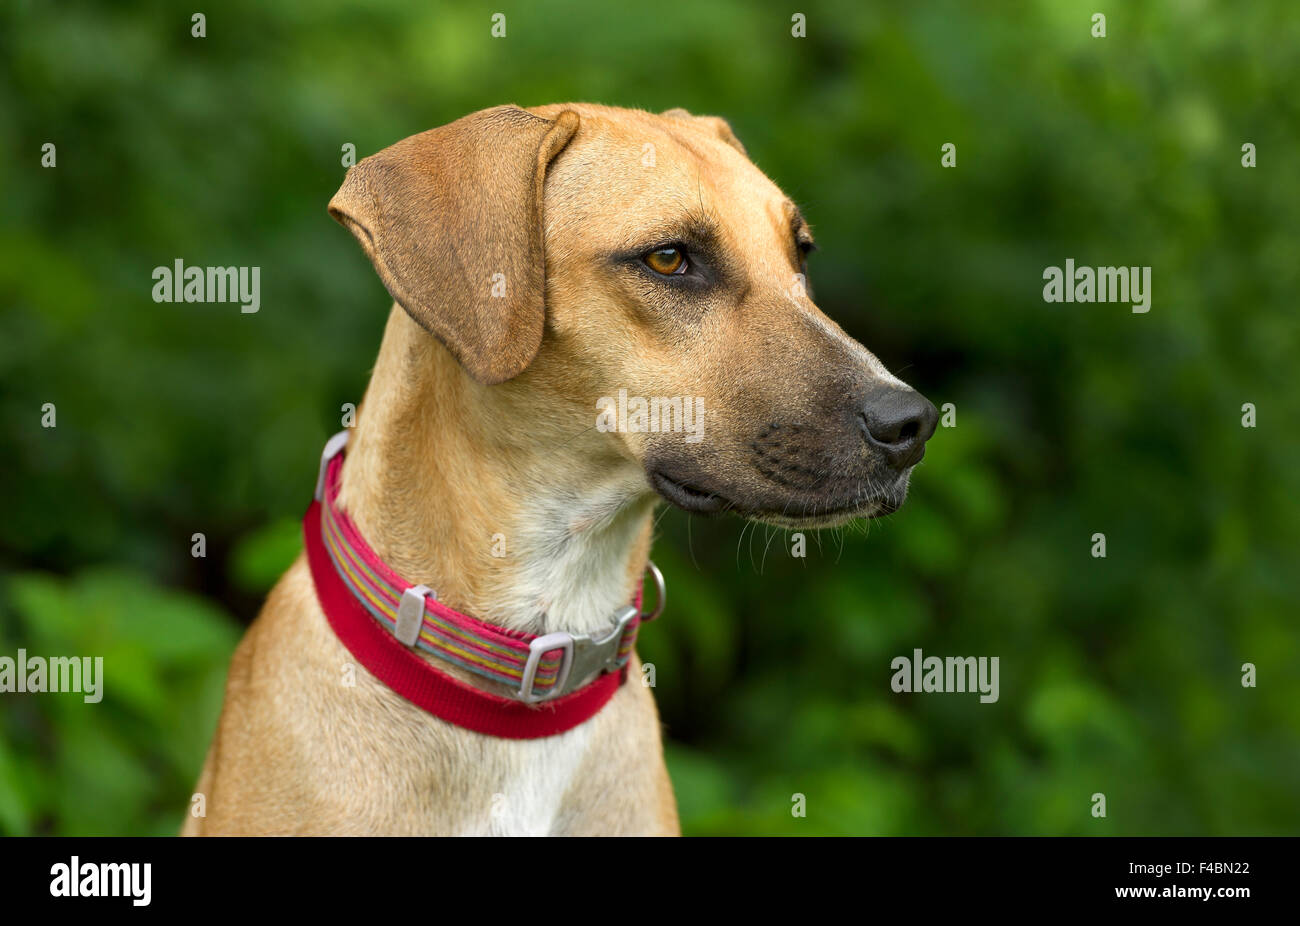 Dog Outdoor is a portrait of an attractive big dog with vibrant brown eyes in the beautiful outdoors. Stock Photo